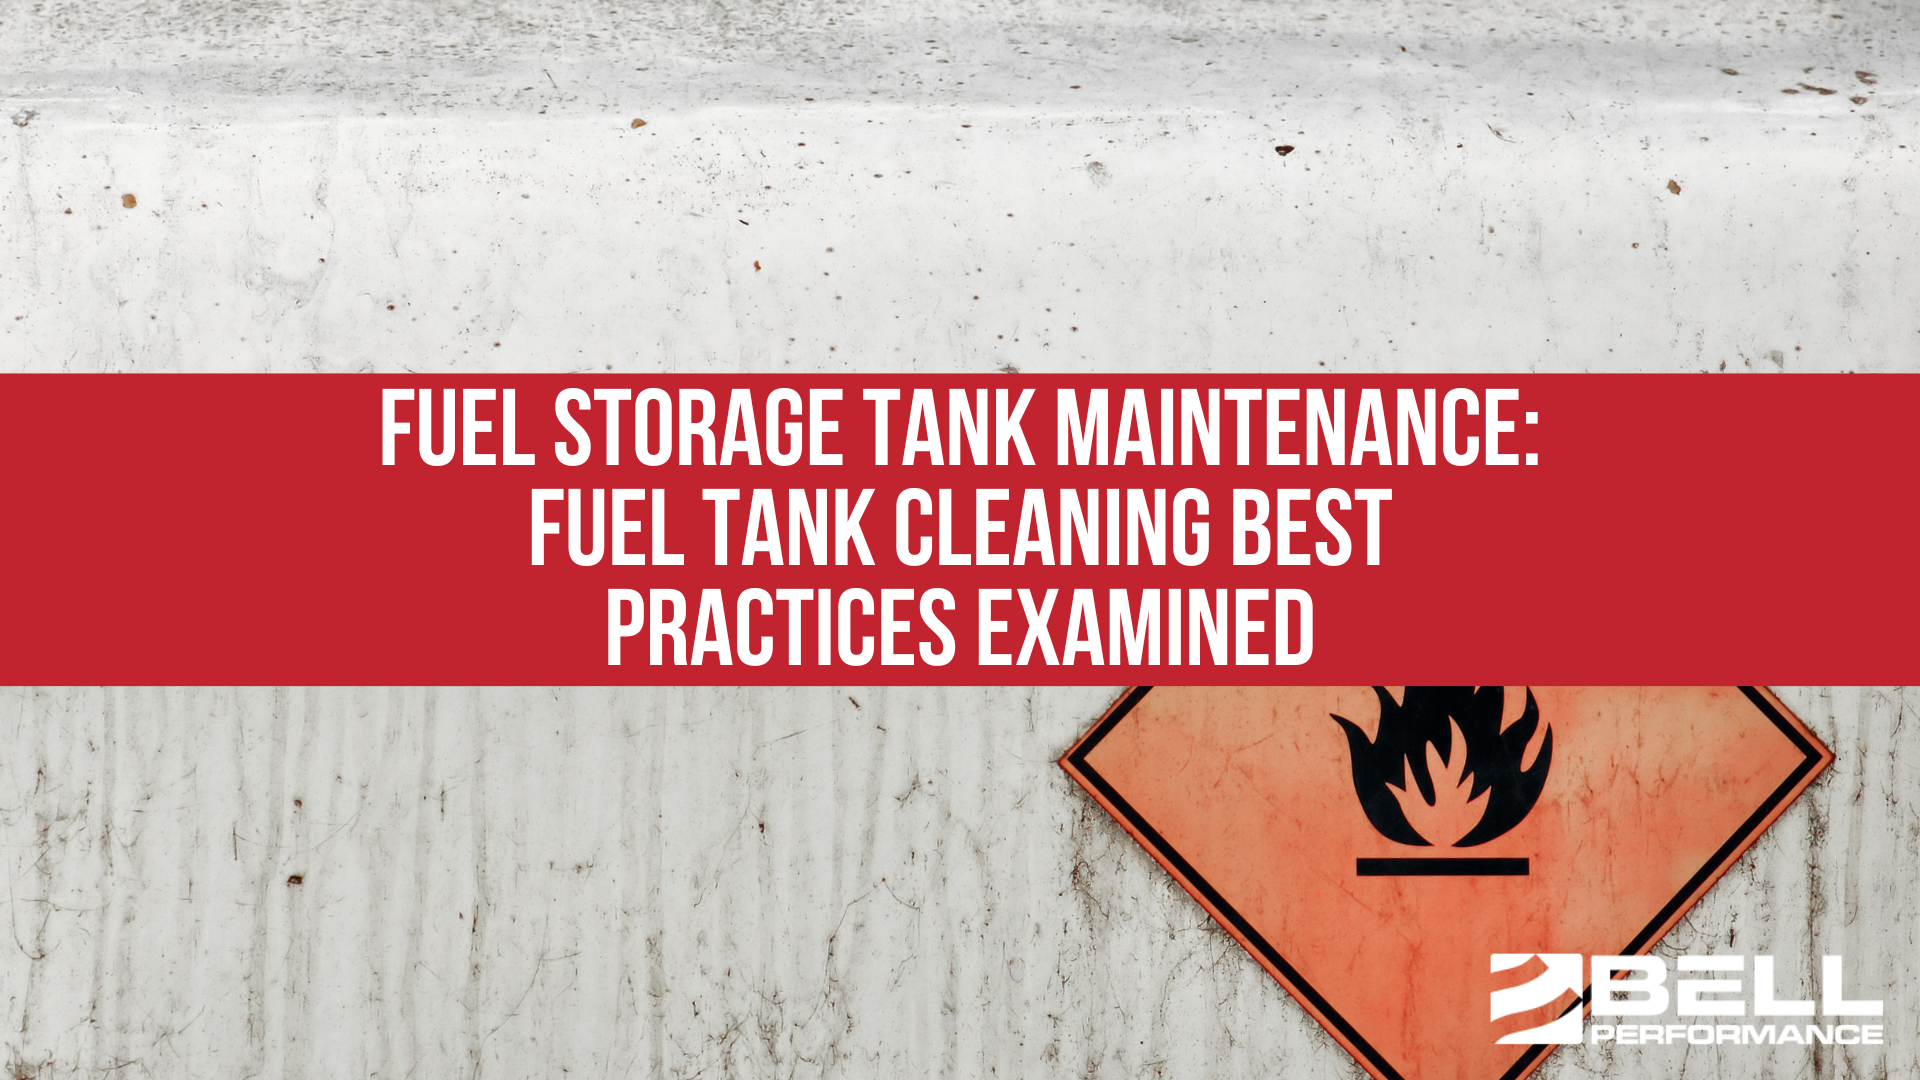 Fuel Storage Tank Maintenance: Fuel Tank Cleaning Best Practices Examined